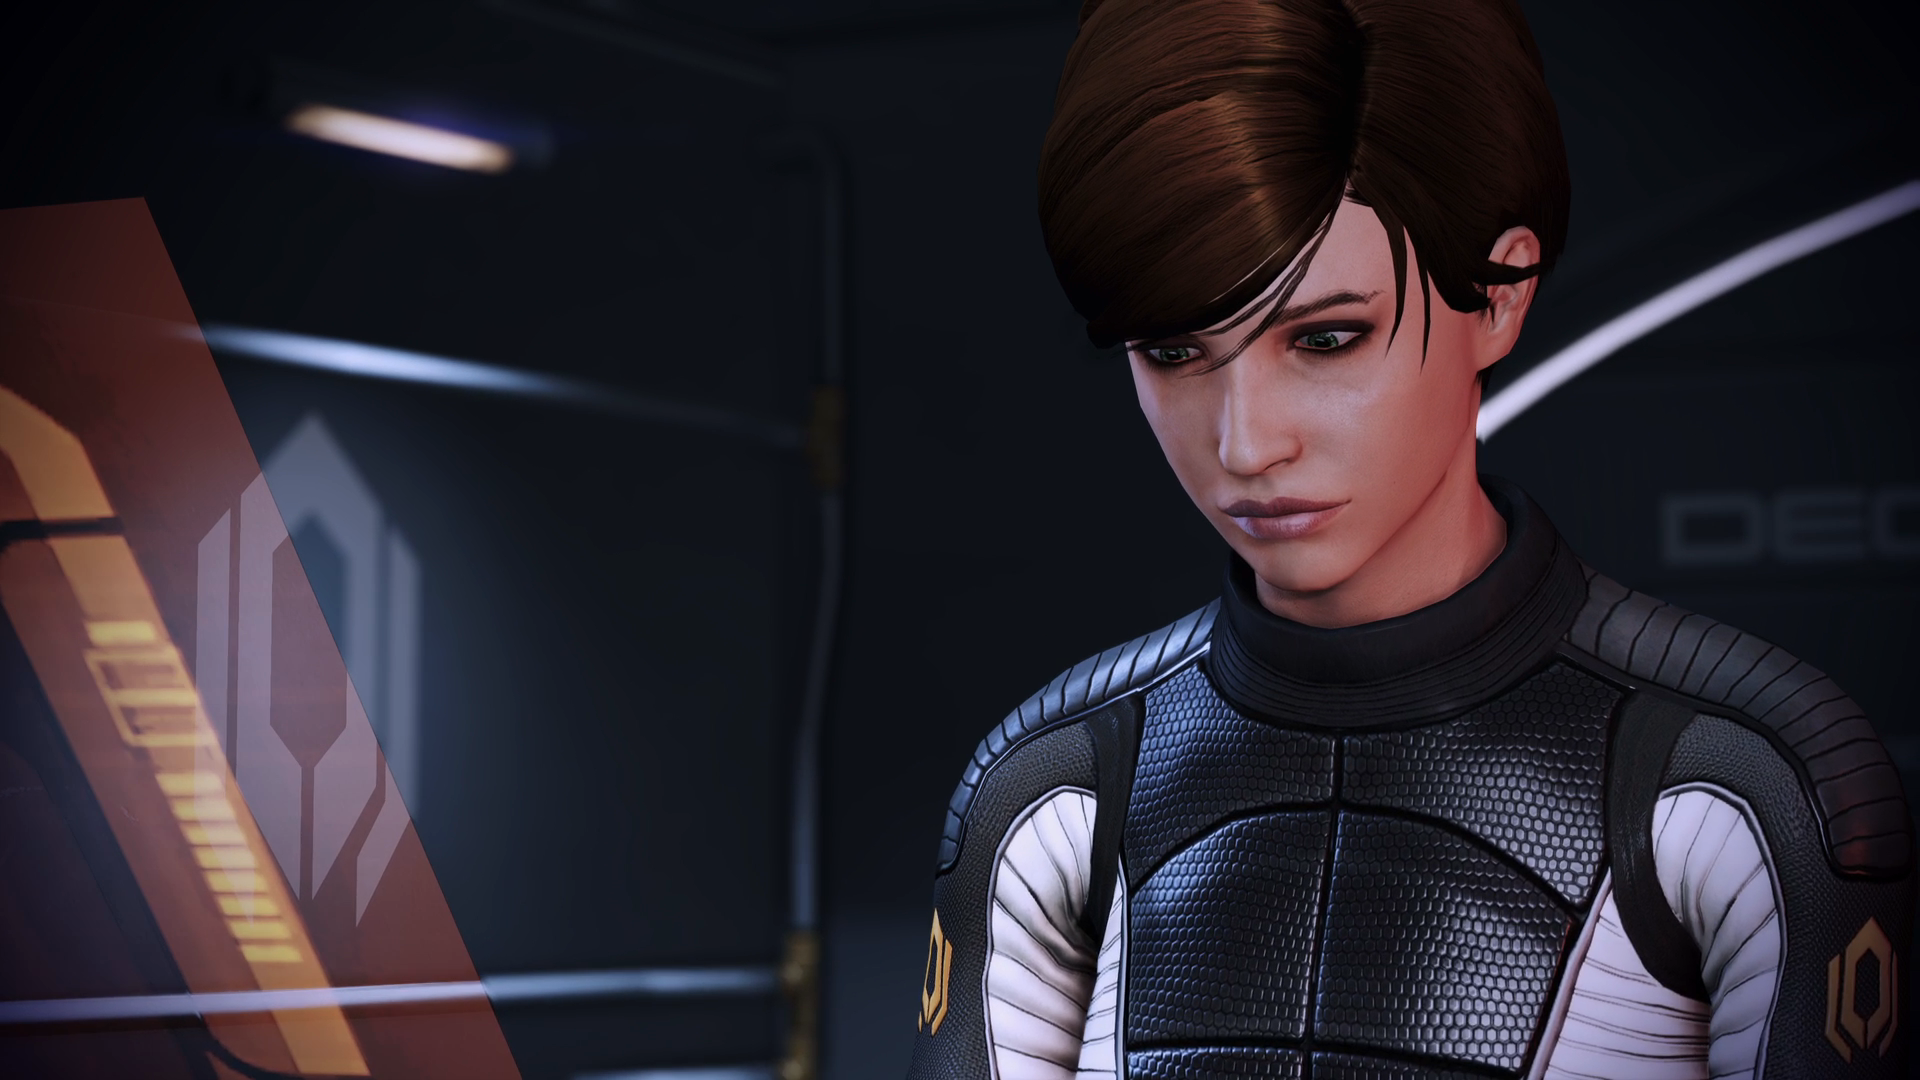 bianca walker recommends mass effect kelly romance pic